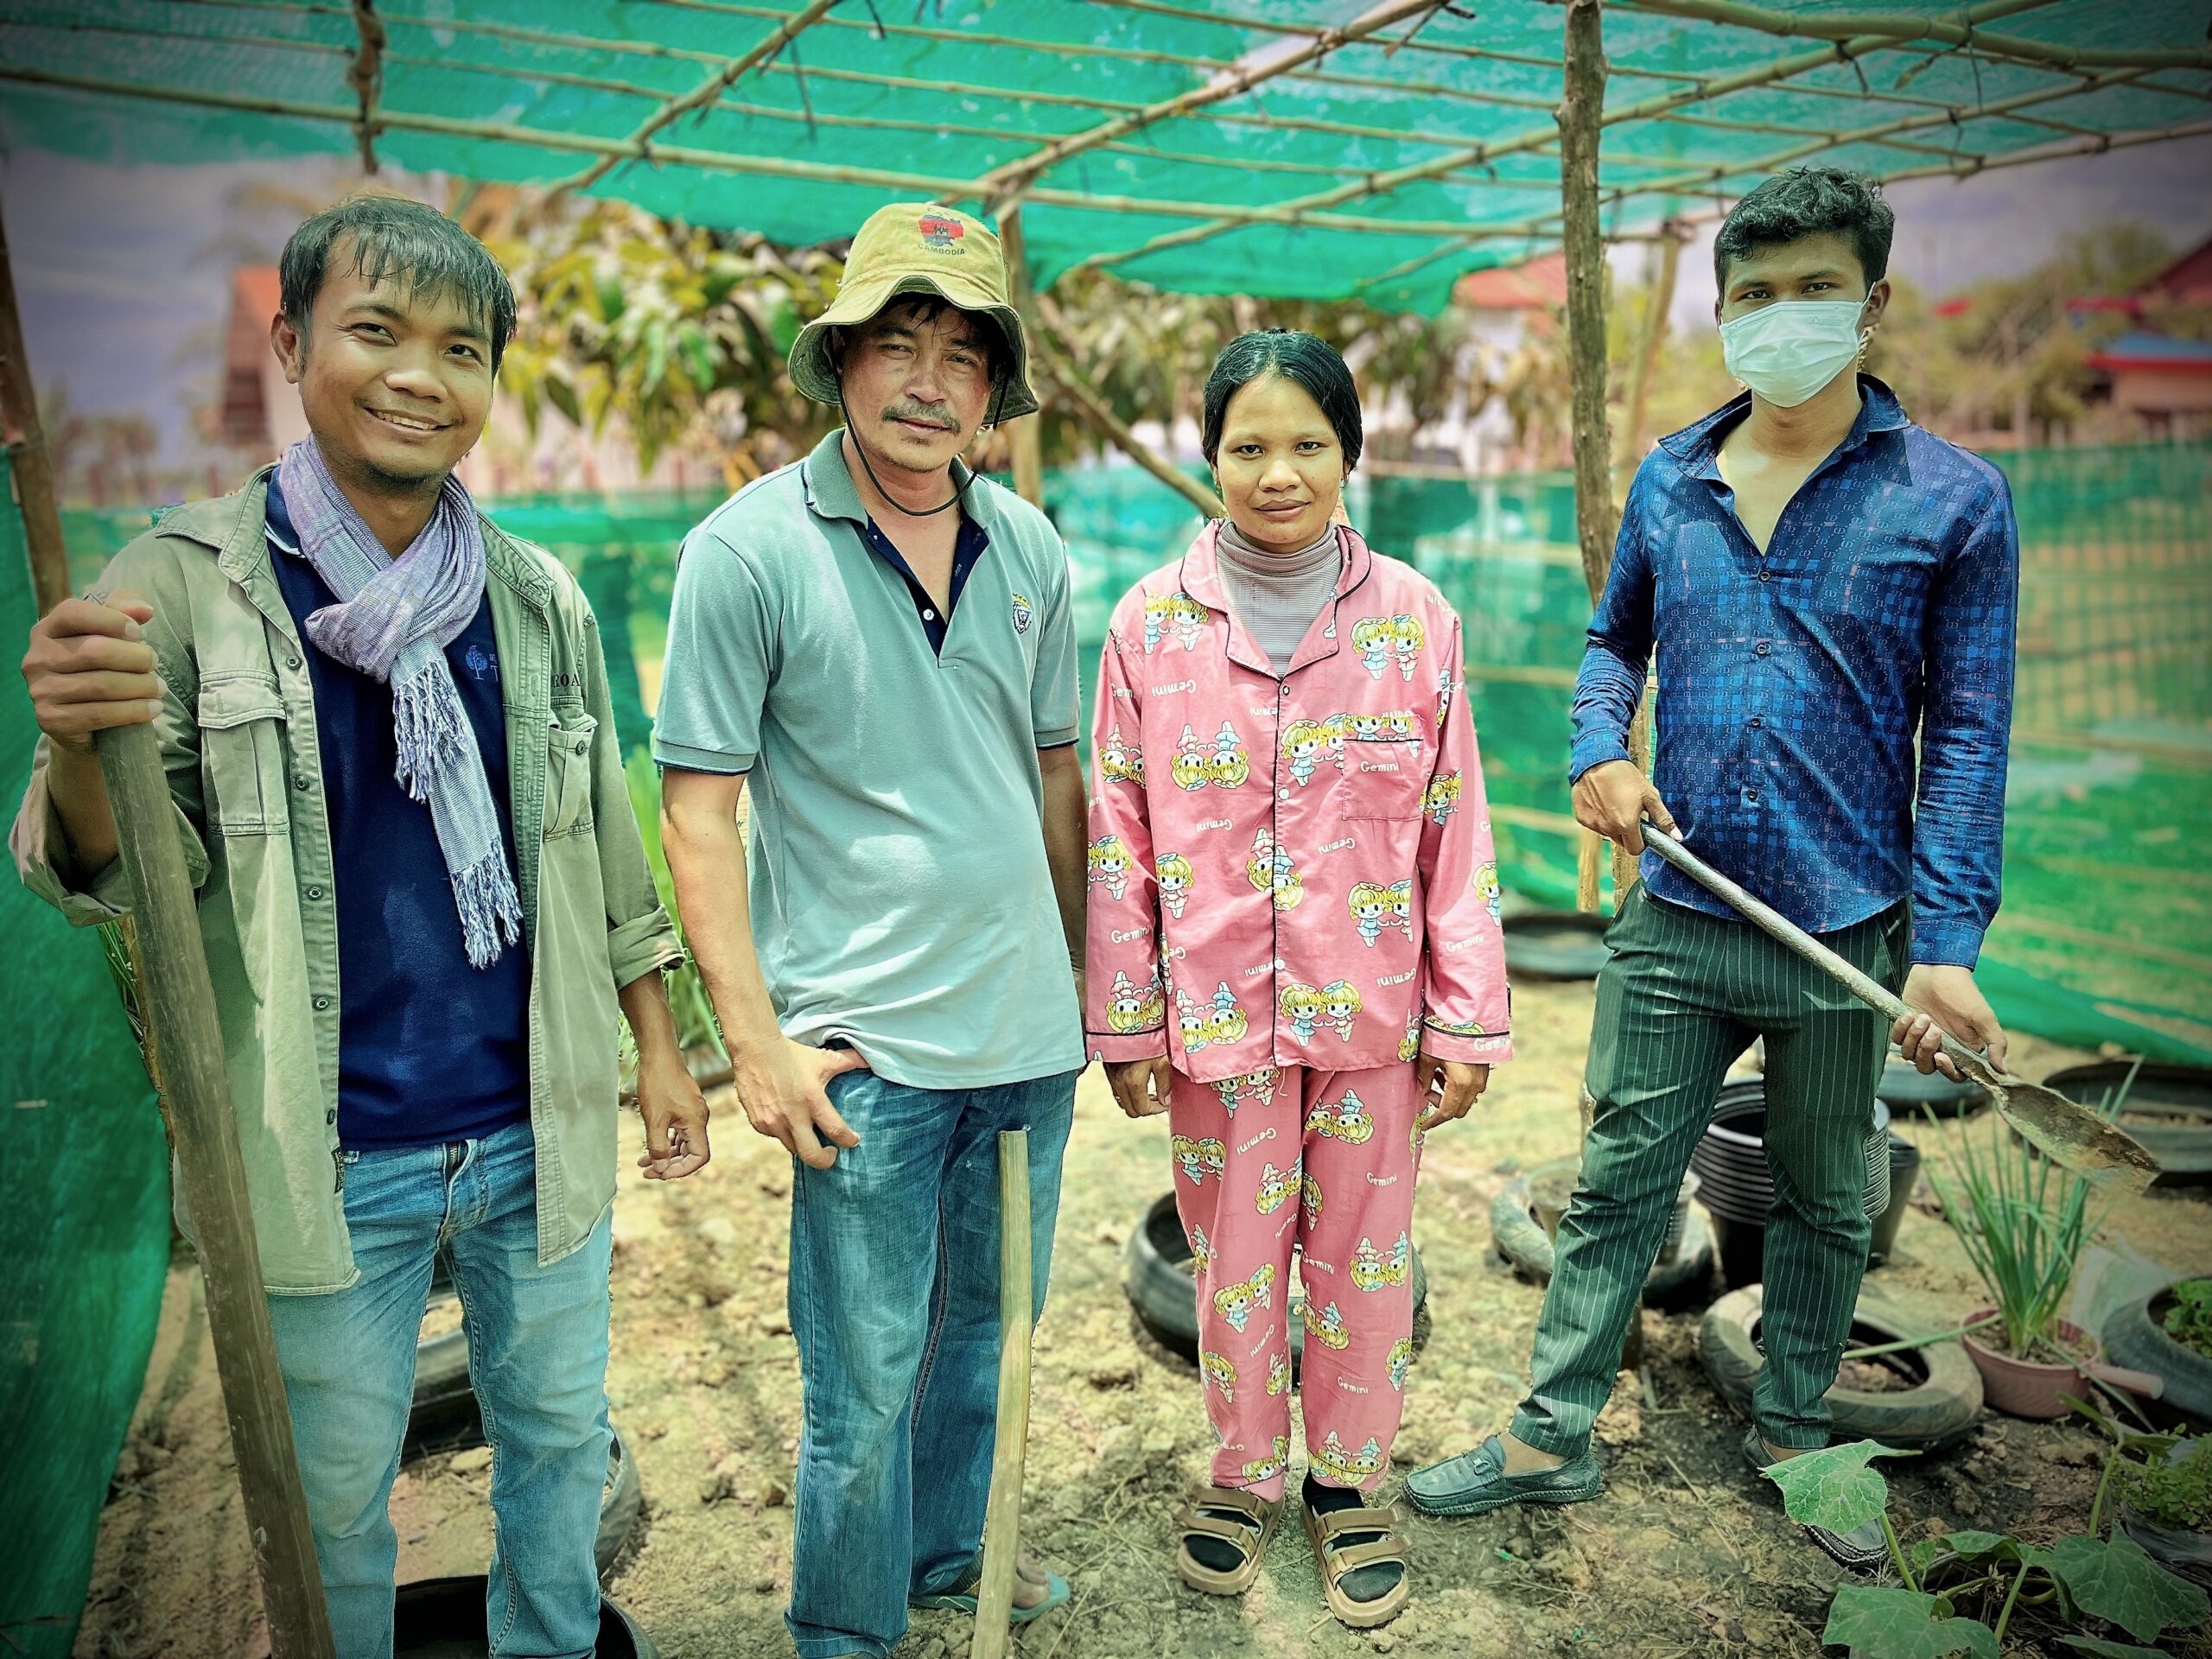 Tackling Malnutrition in Rural Cambodia with Home Gardens